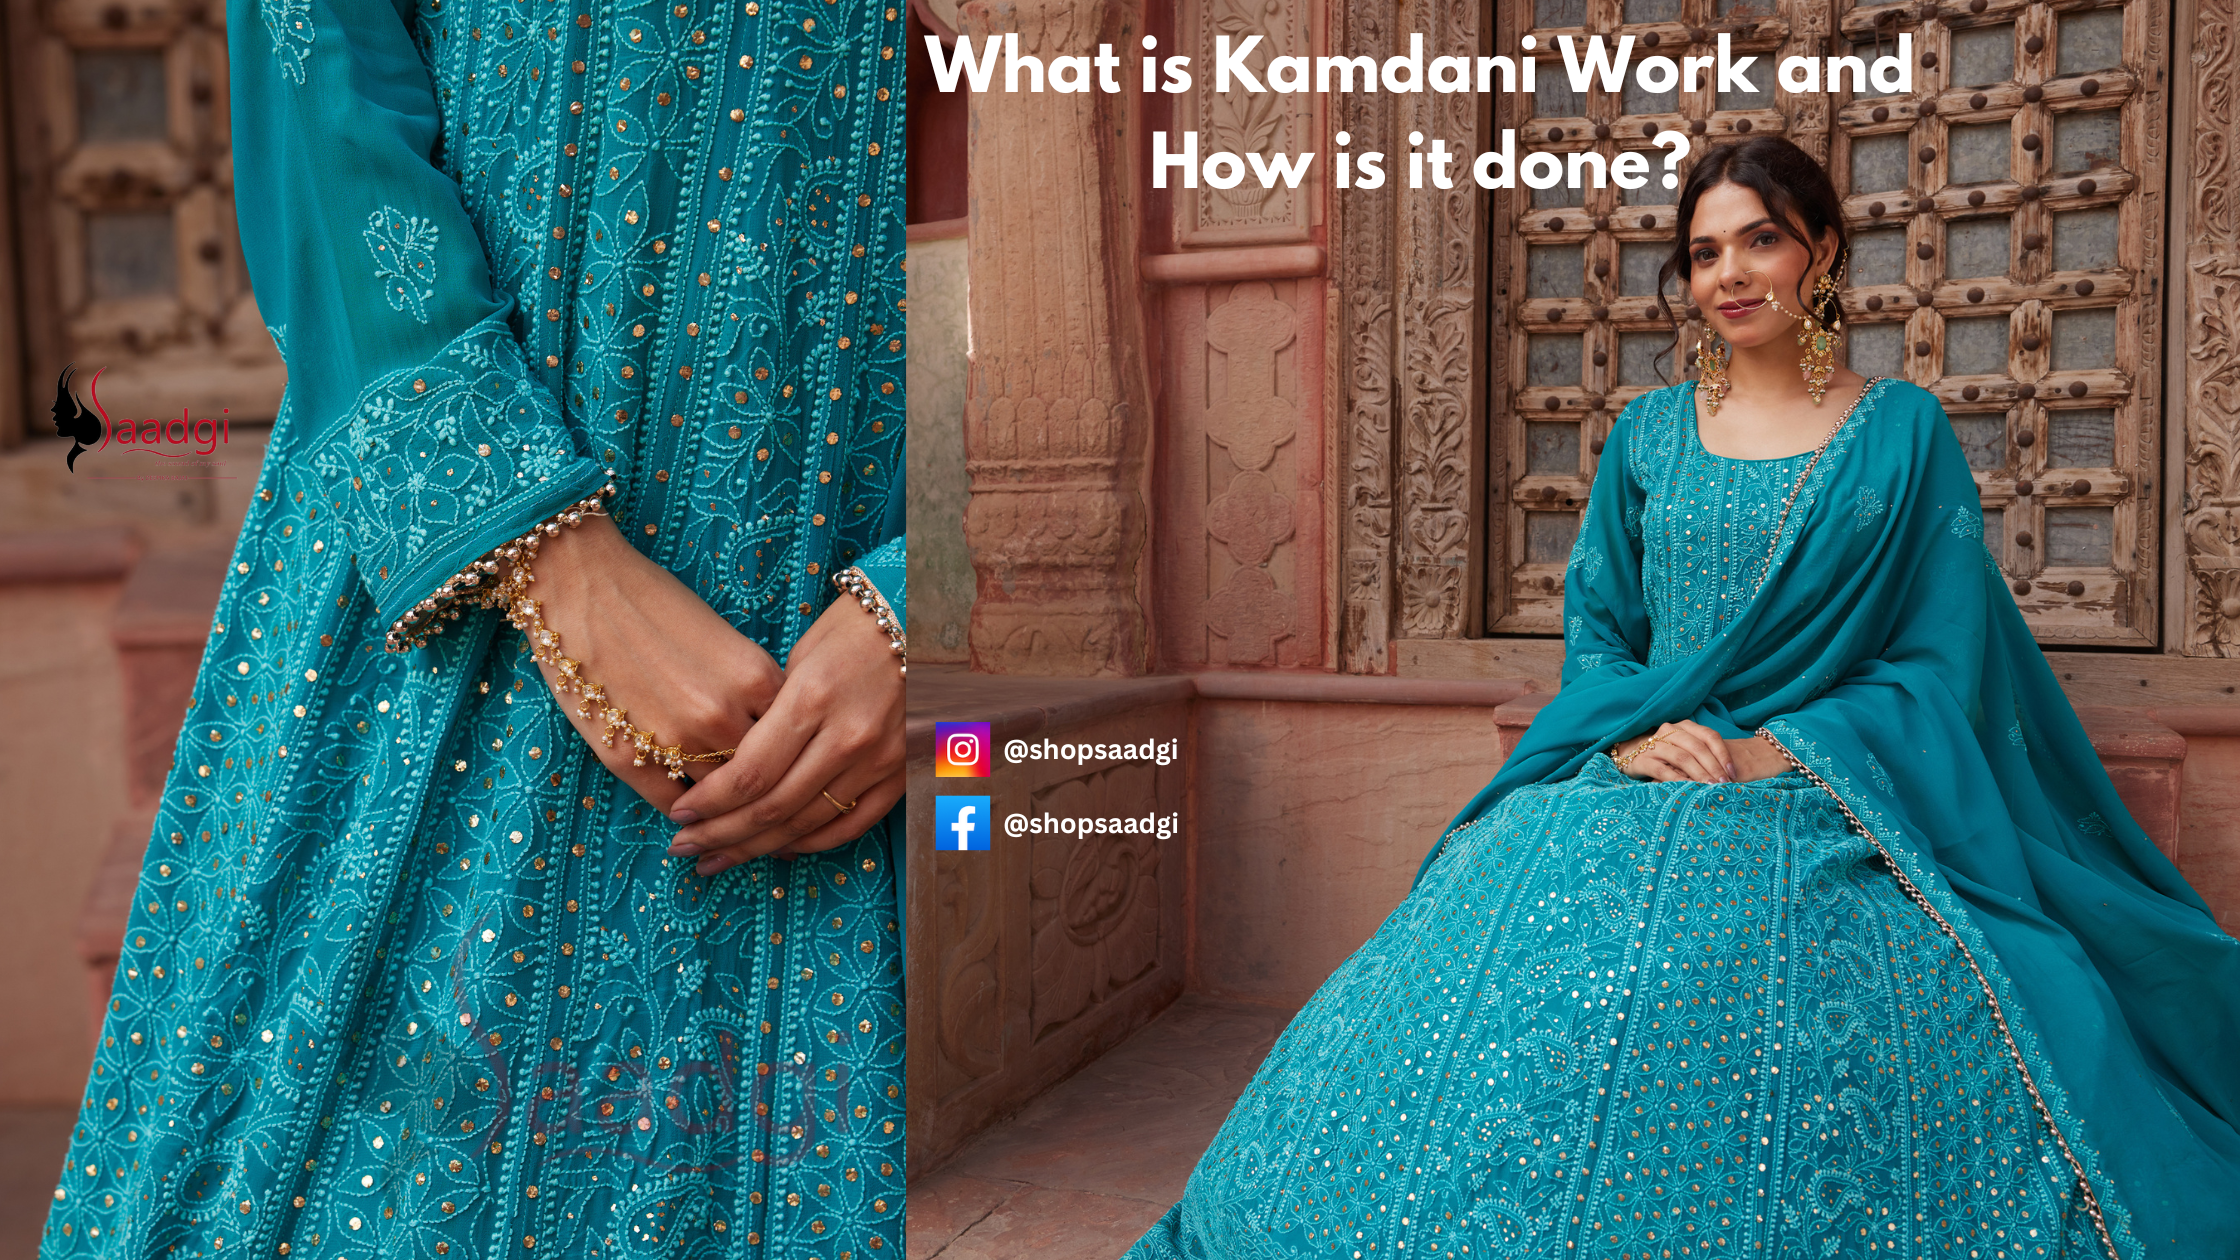 What is Kamdani Work and How is it done?